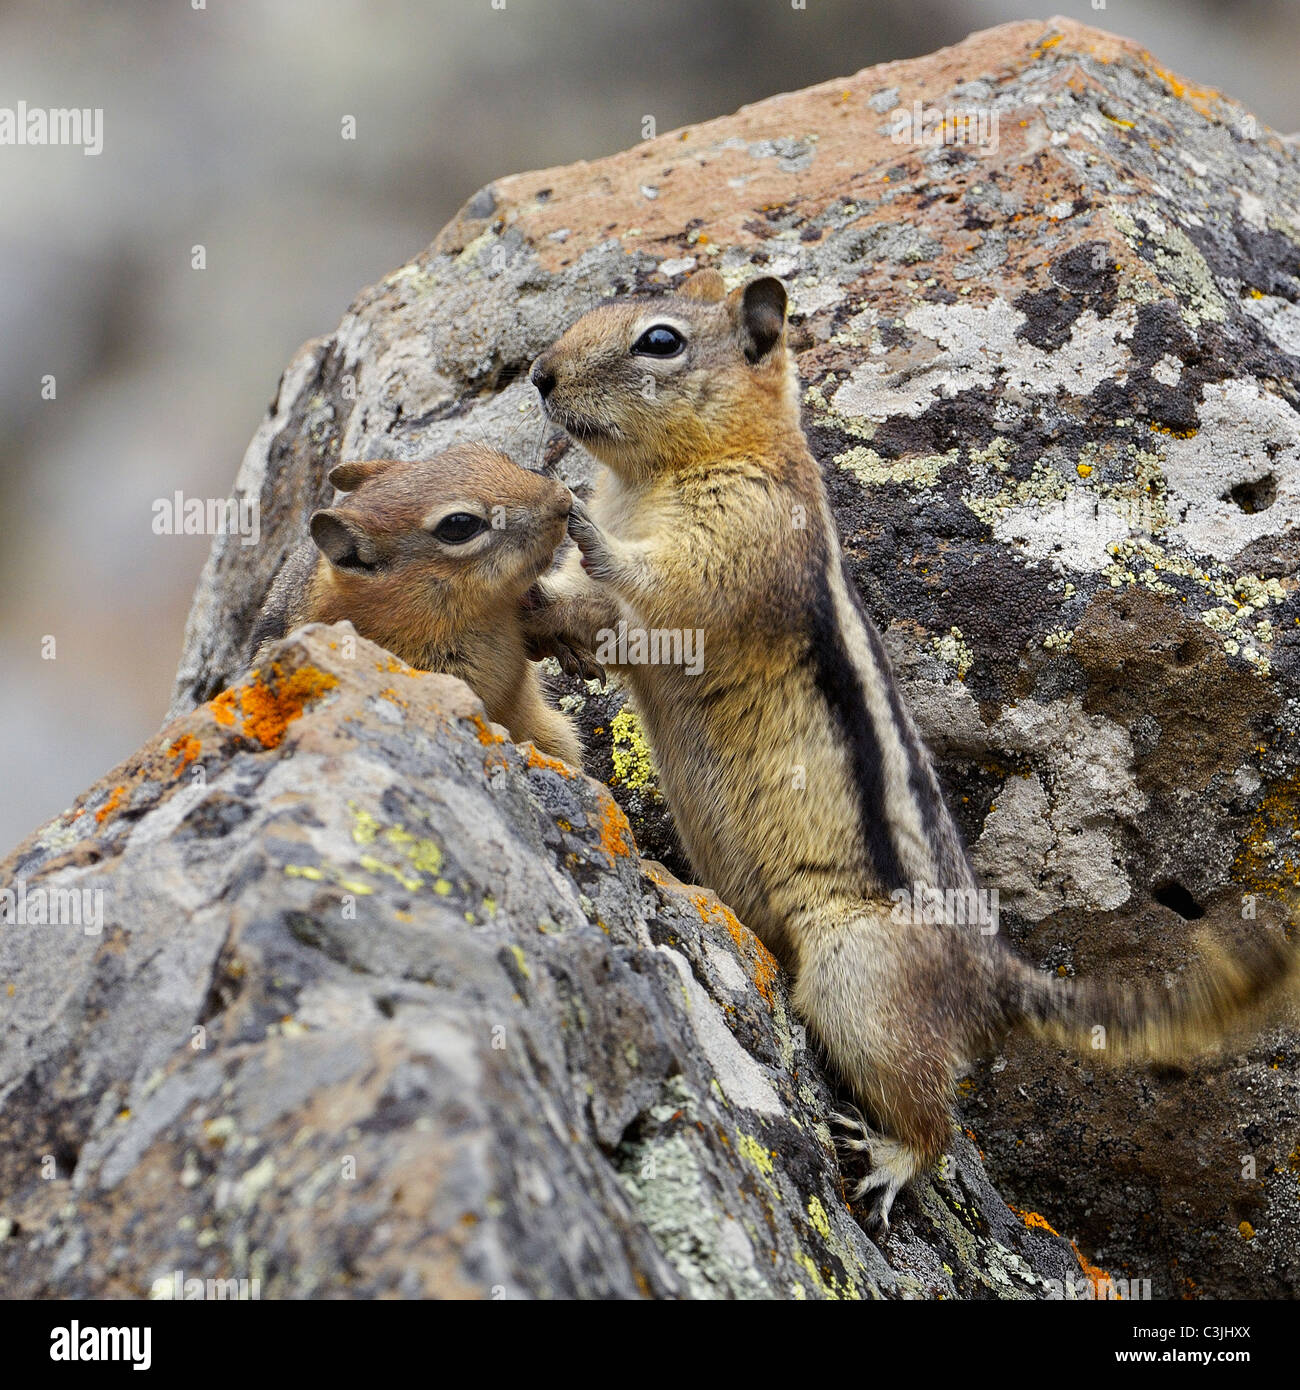 Golden-mantled Ground Squirrels playing and loving. Stock Photo